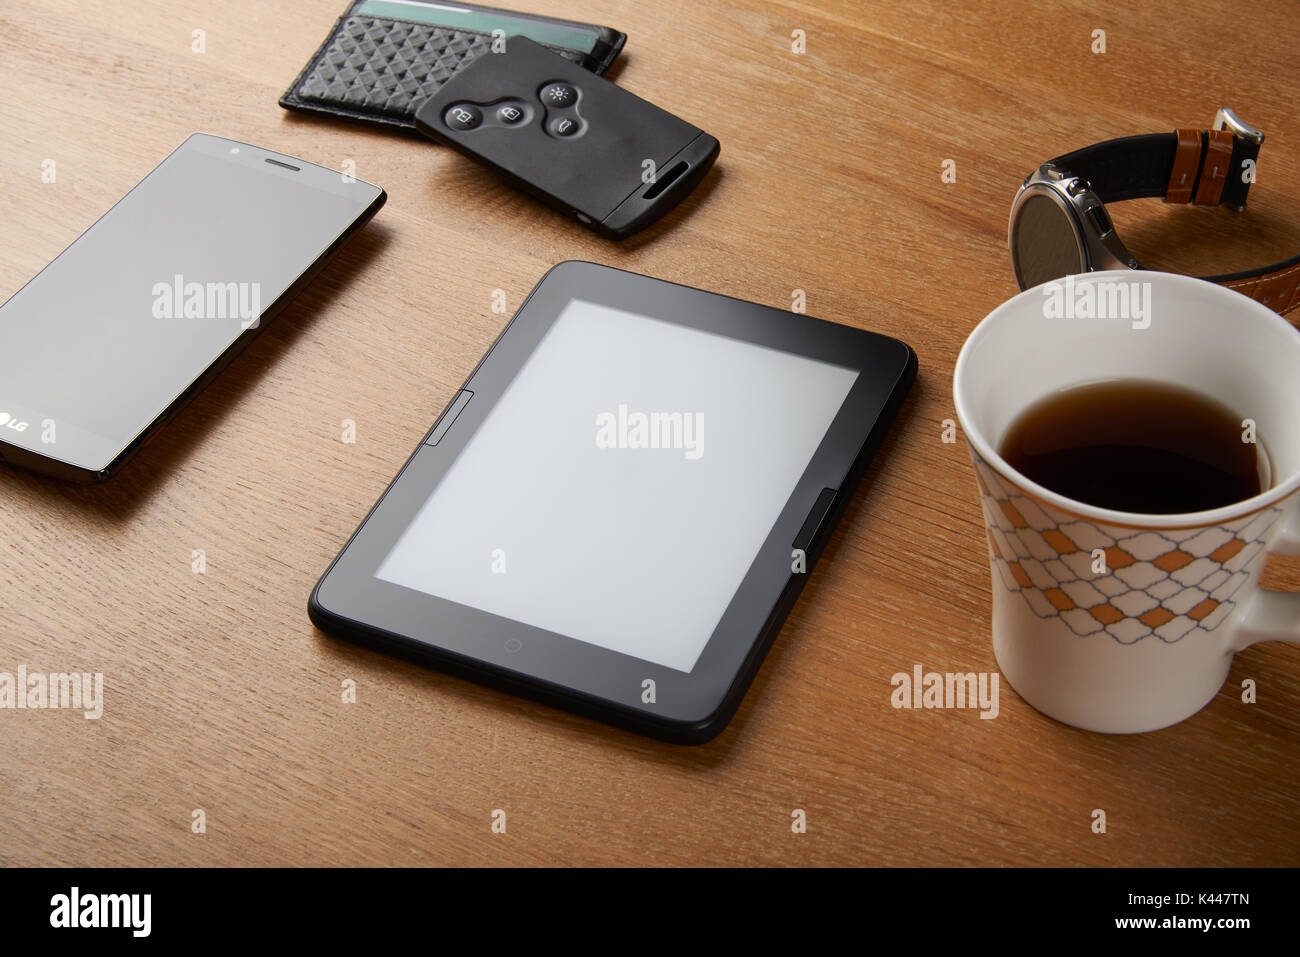 E-book device with Smart key, card wallet, smart watch, smart phone and a cup of coffee on a wooden table. The device is a dedicated device for readin Stock Photo